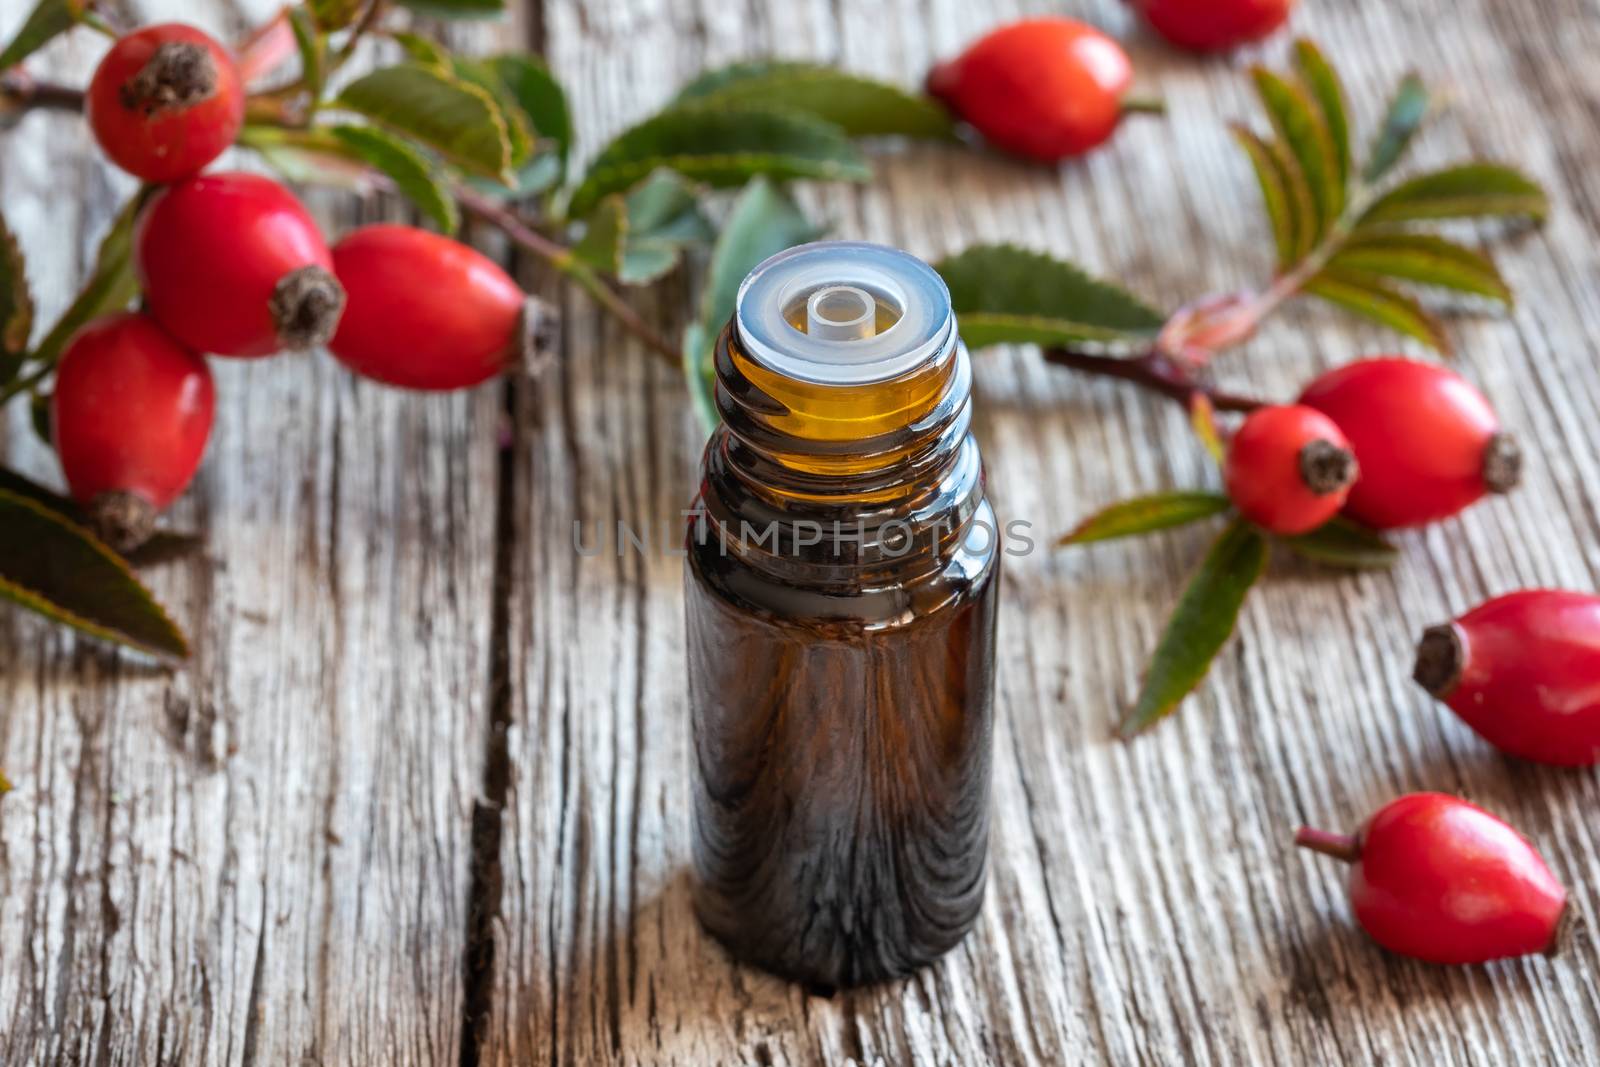 A bottle of rose hip seed oil with fresh ripe berries